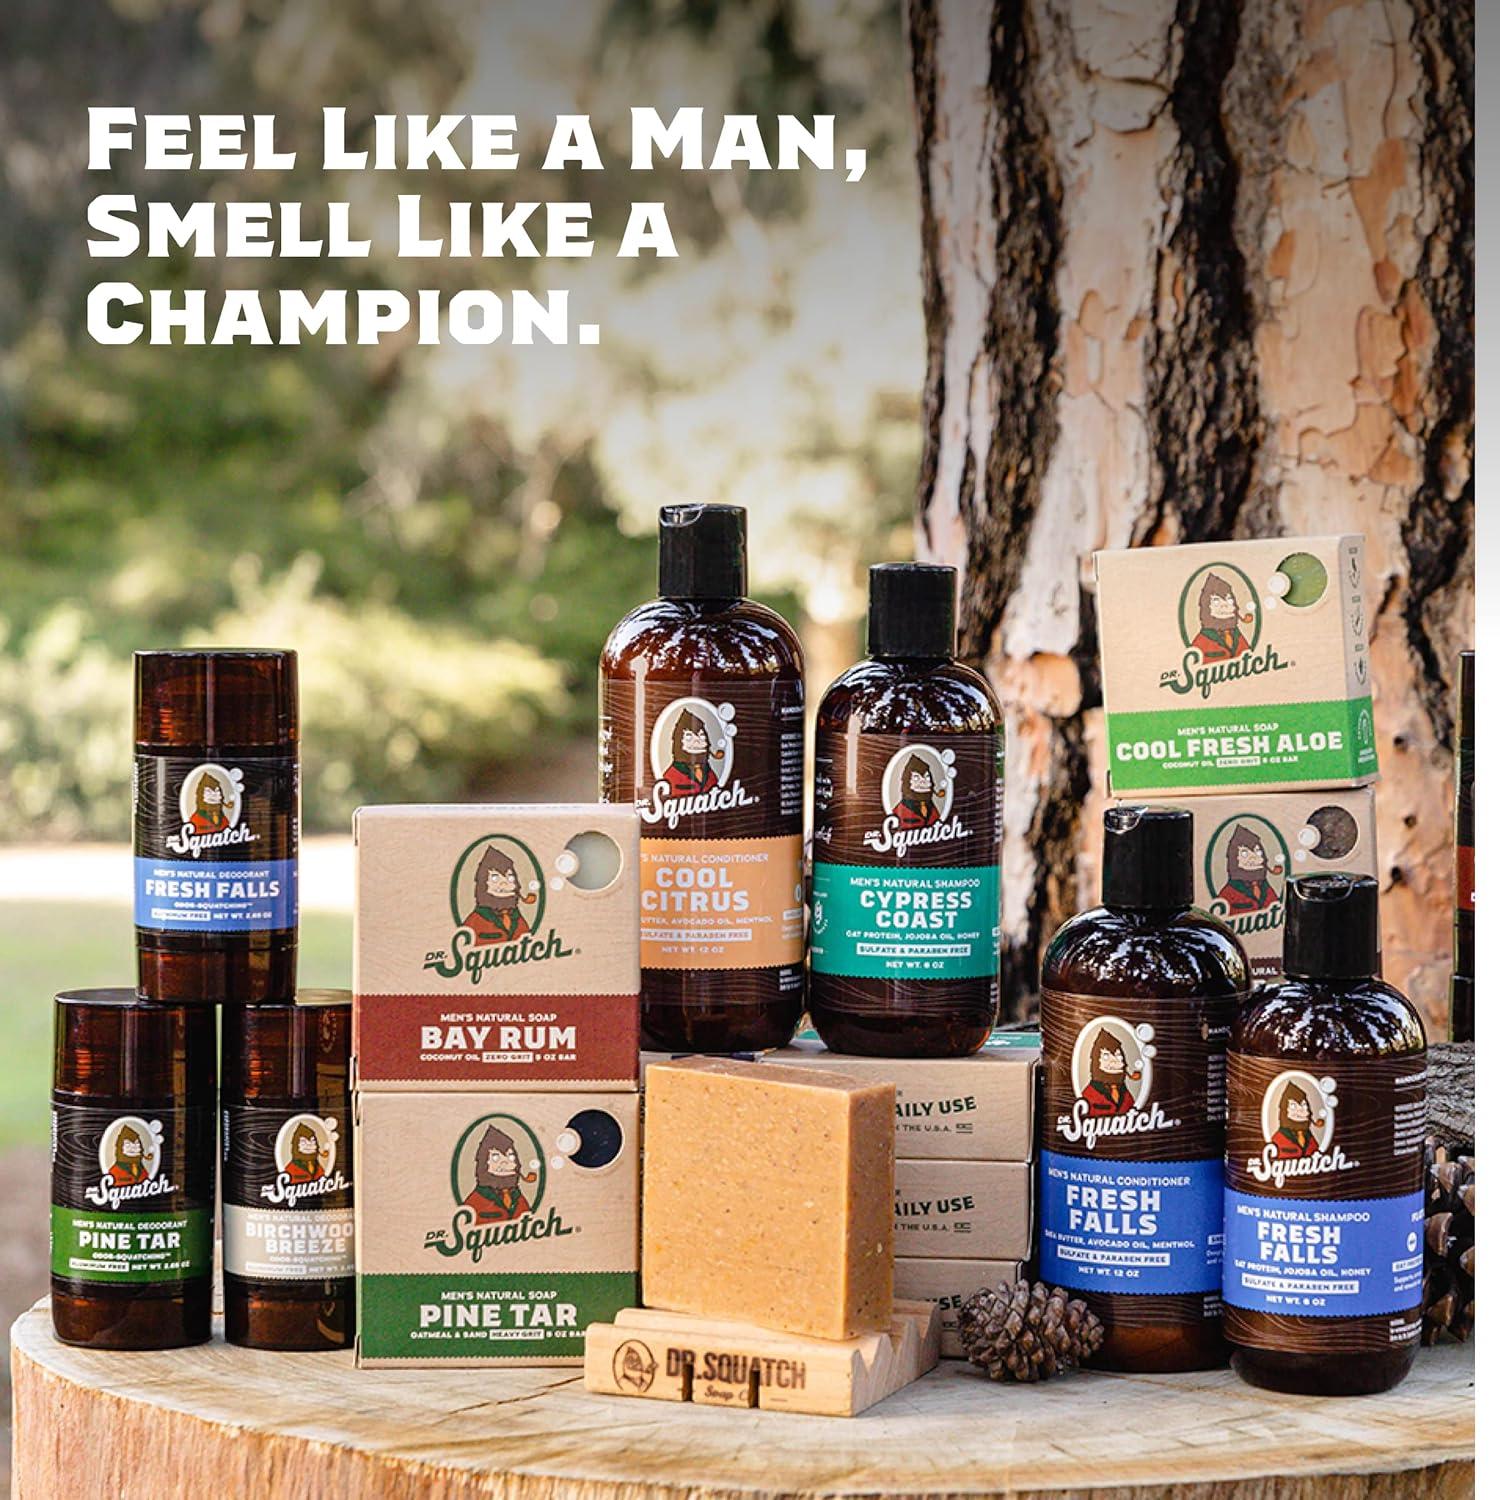 Dr. Squatch Men's Soap Variety 4 Pack - Wood Barrel Bourbon, Gold Moss, Bay  Rum, Cool Fresh Aloe : Beauty & Personal Care 